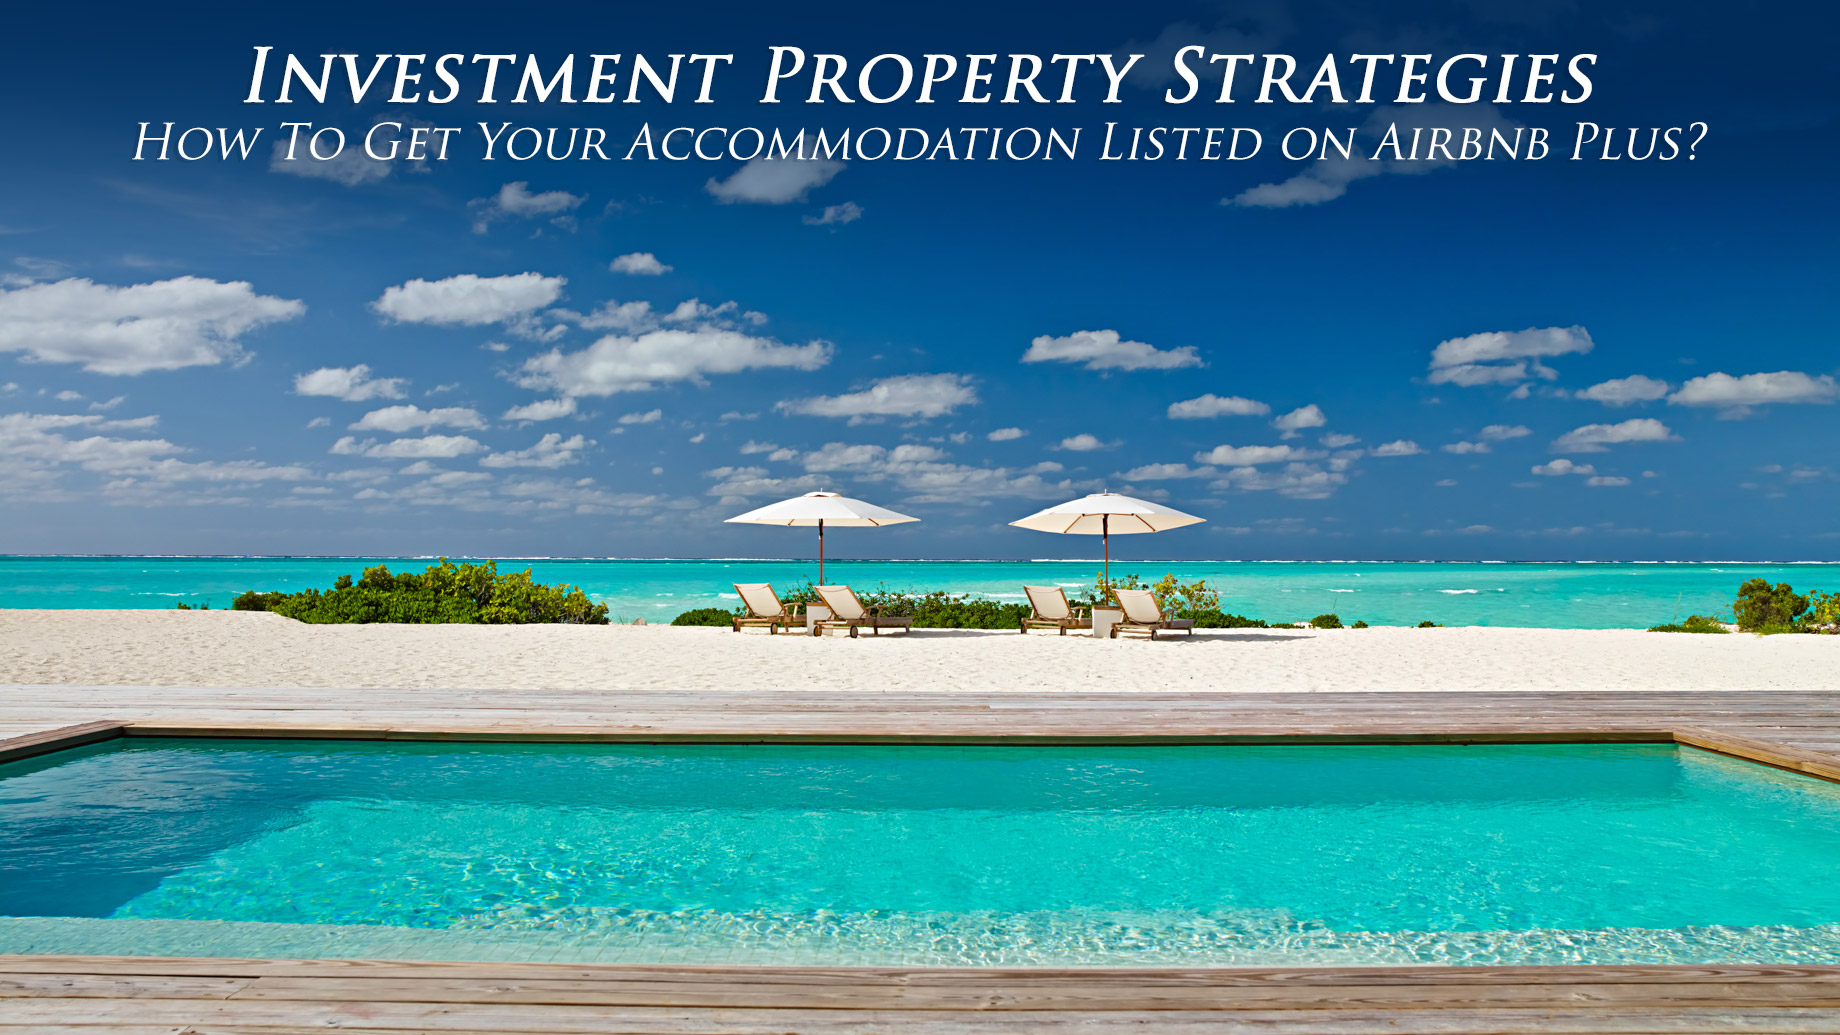 Investment Property Strategies - How To Get Your Accommodation Listed on Airbnb Plus?